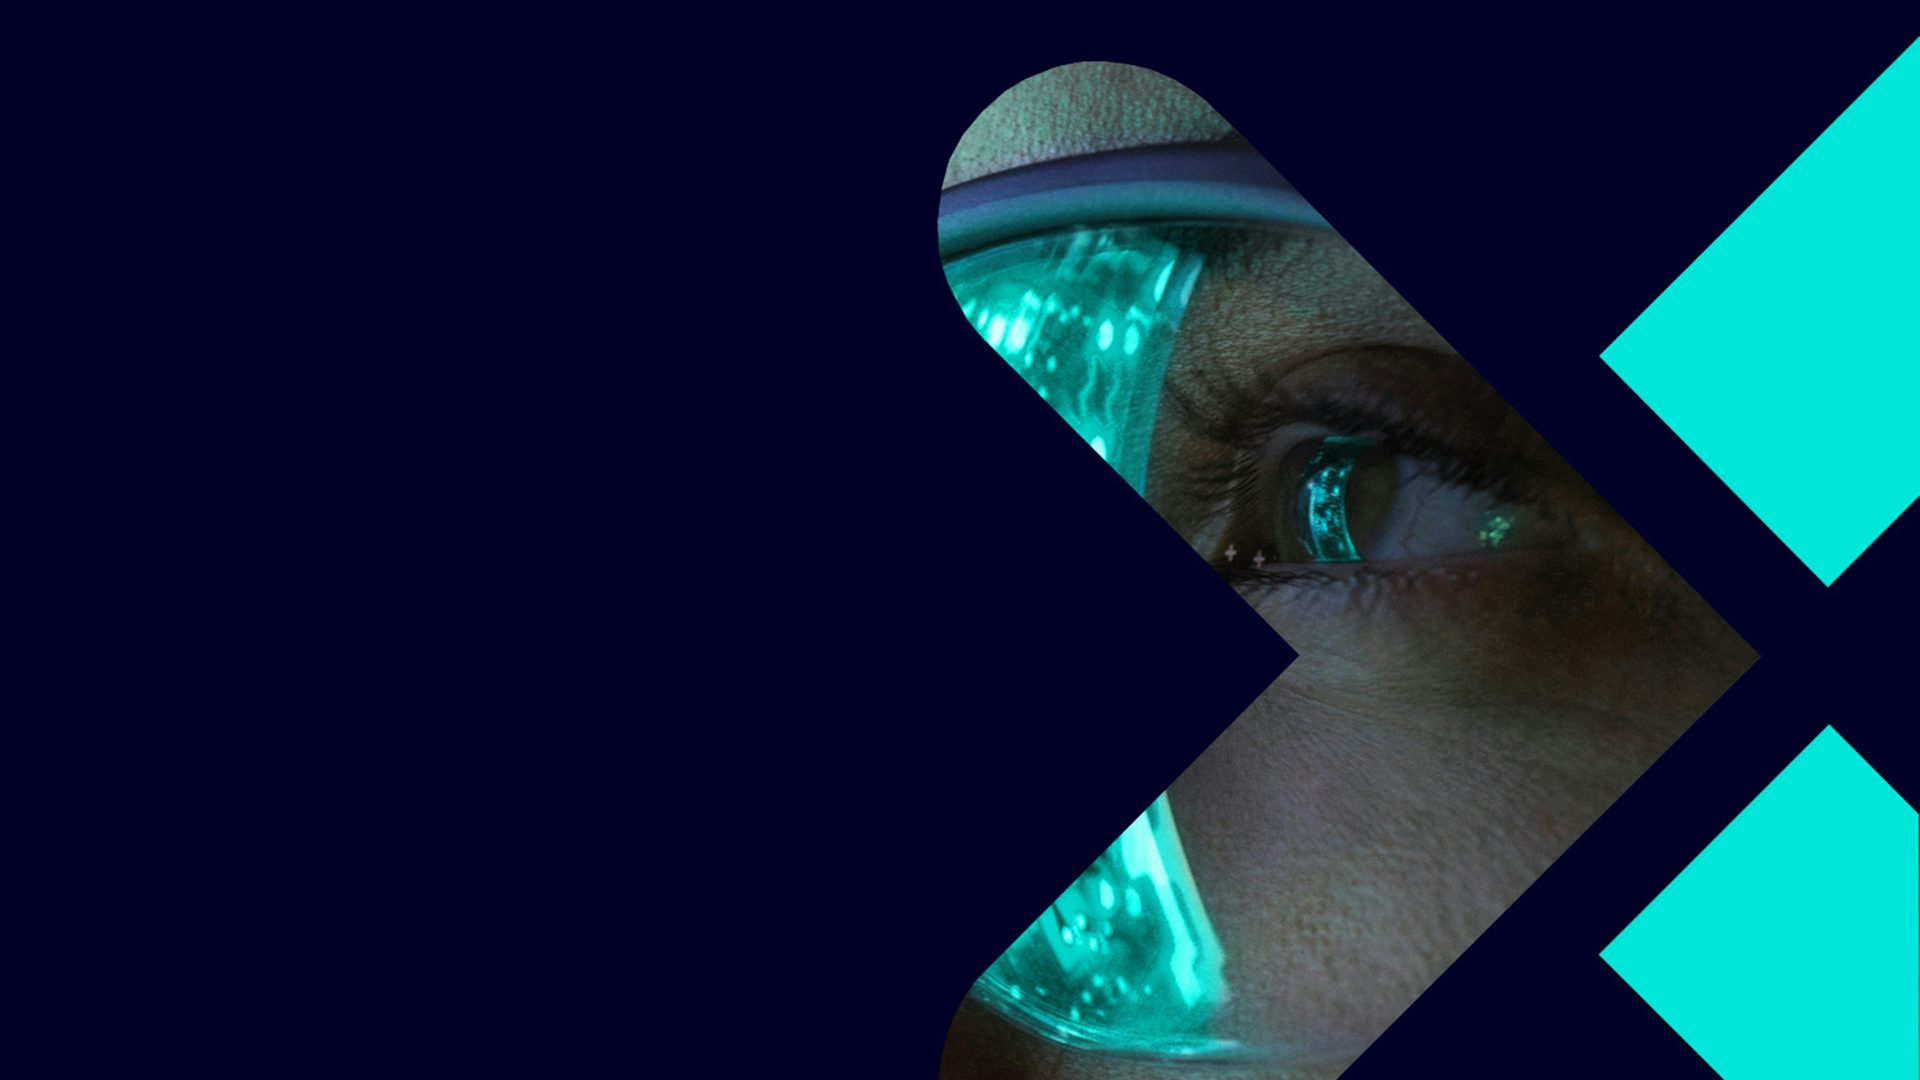 An X for Siemens Xcelerator as a Service is overlaid on a bright green digital diagram, which is reflected in a woman's safety glasses.